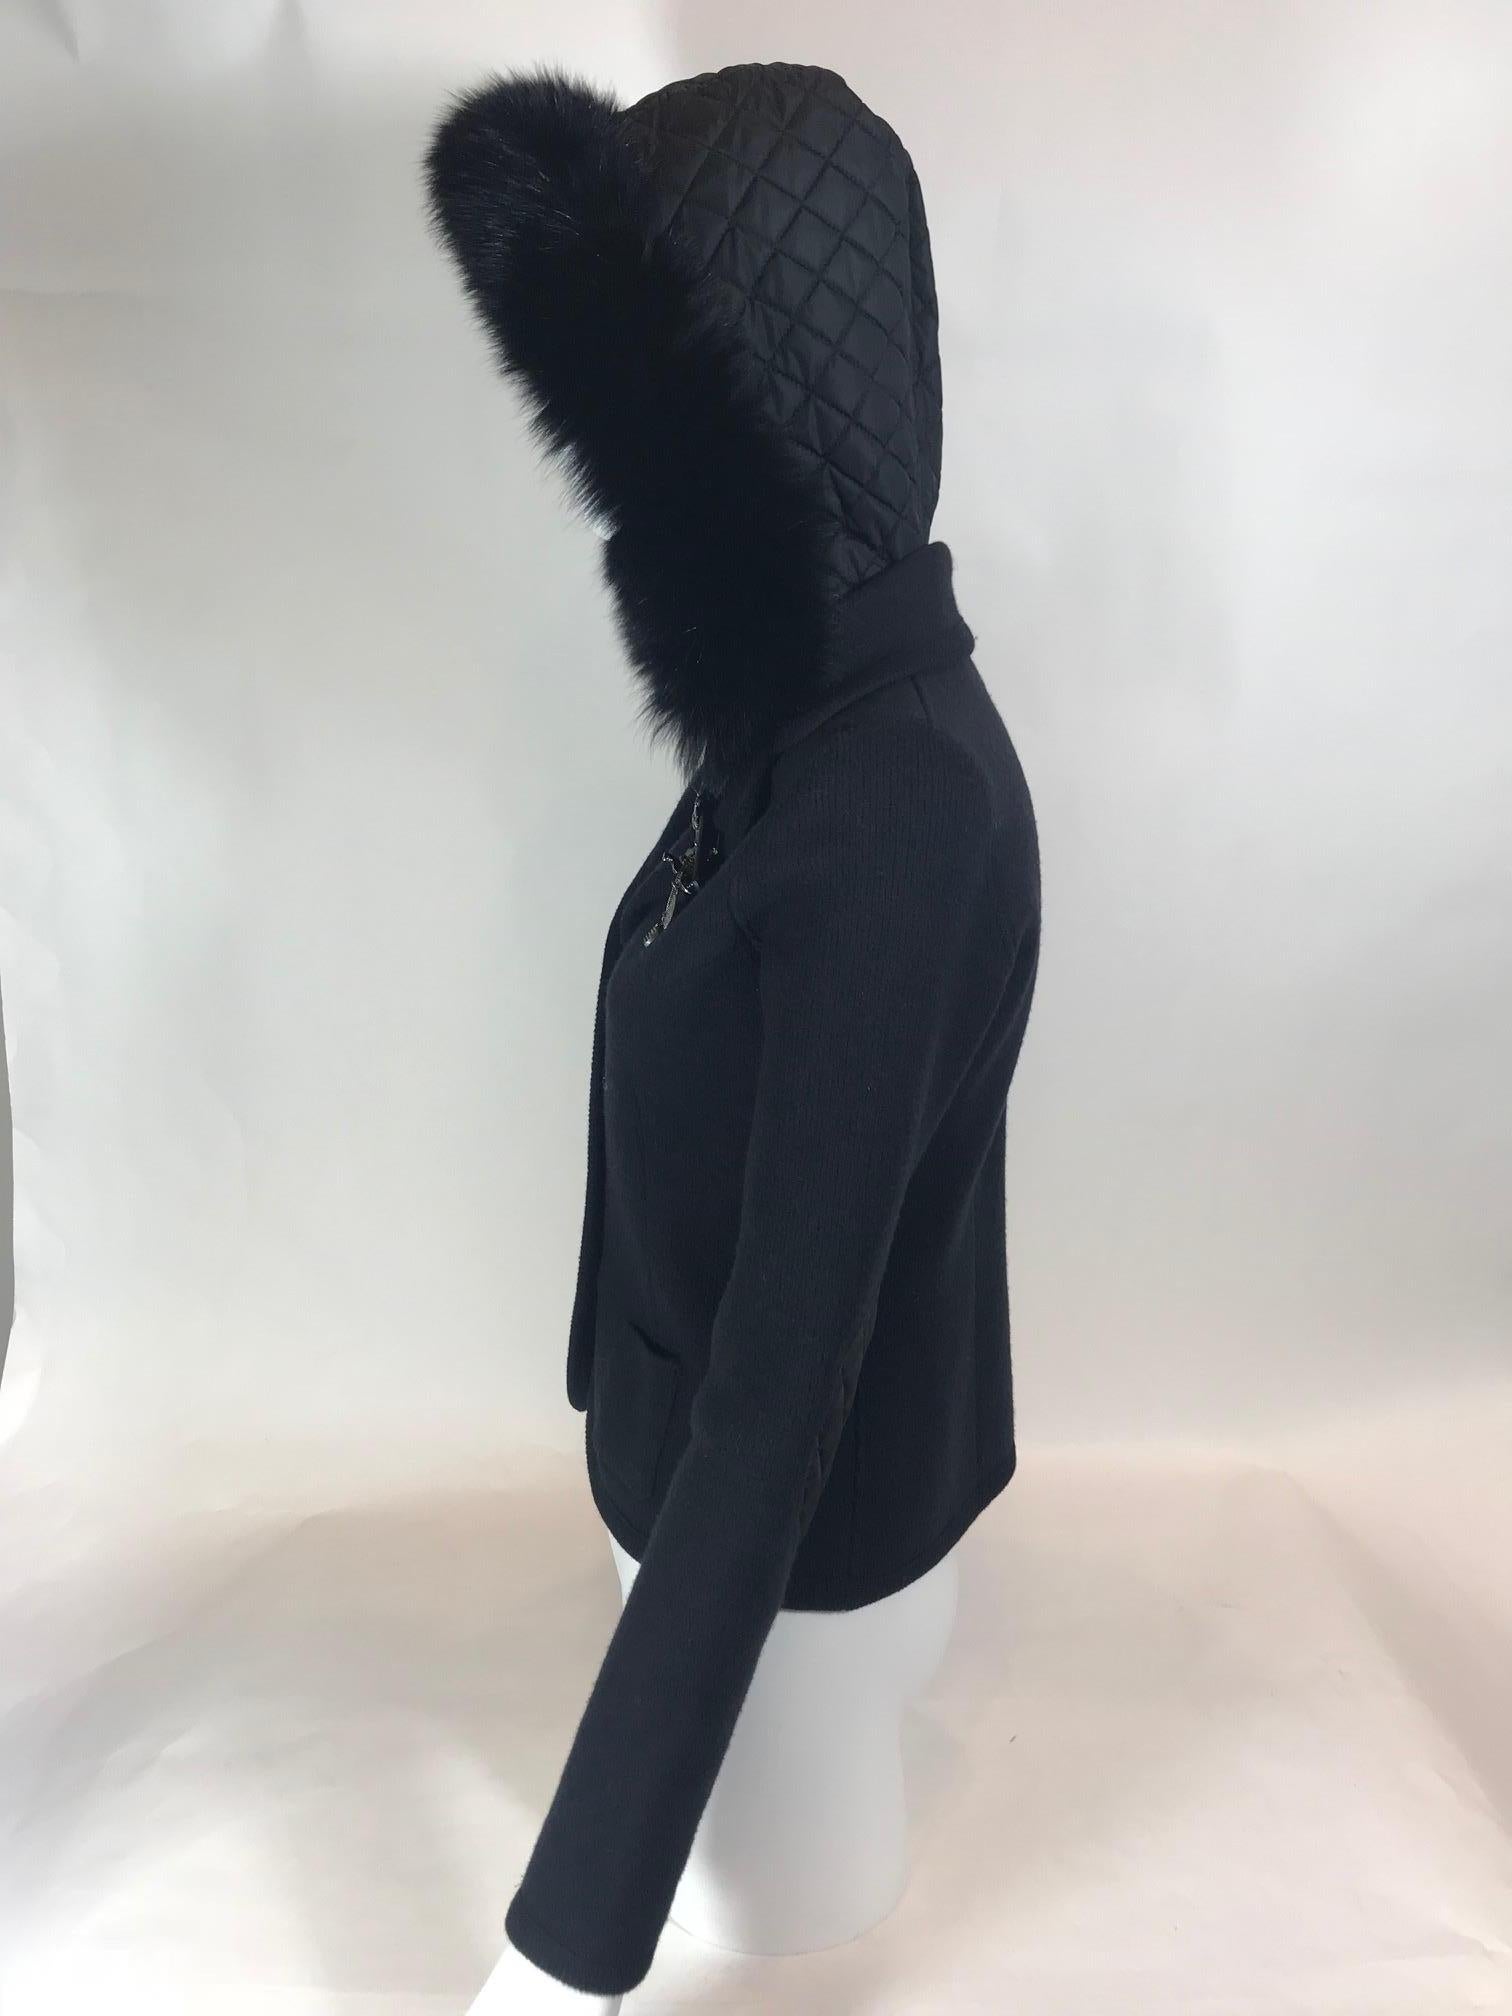 Prada Fur Hooded Knit Sweater For Sale 6